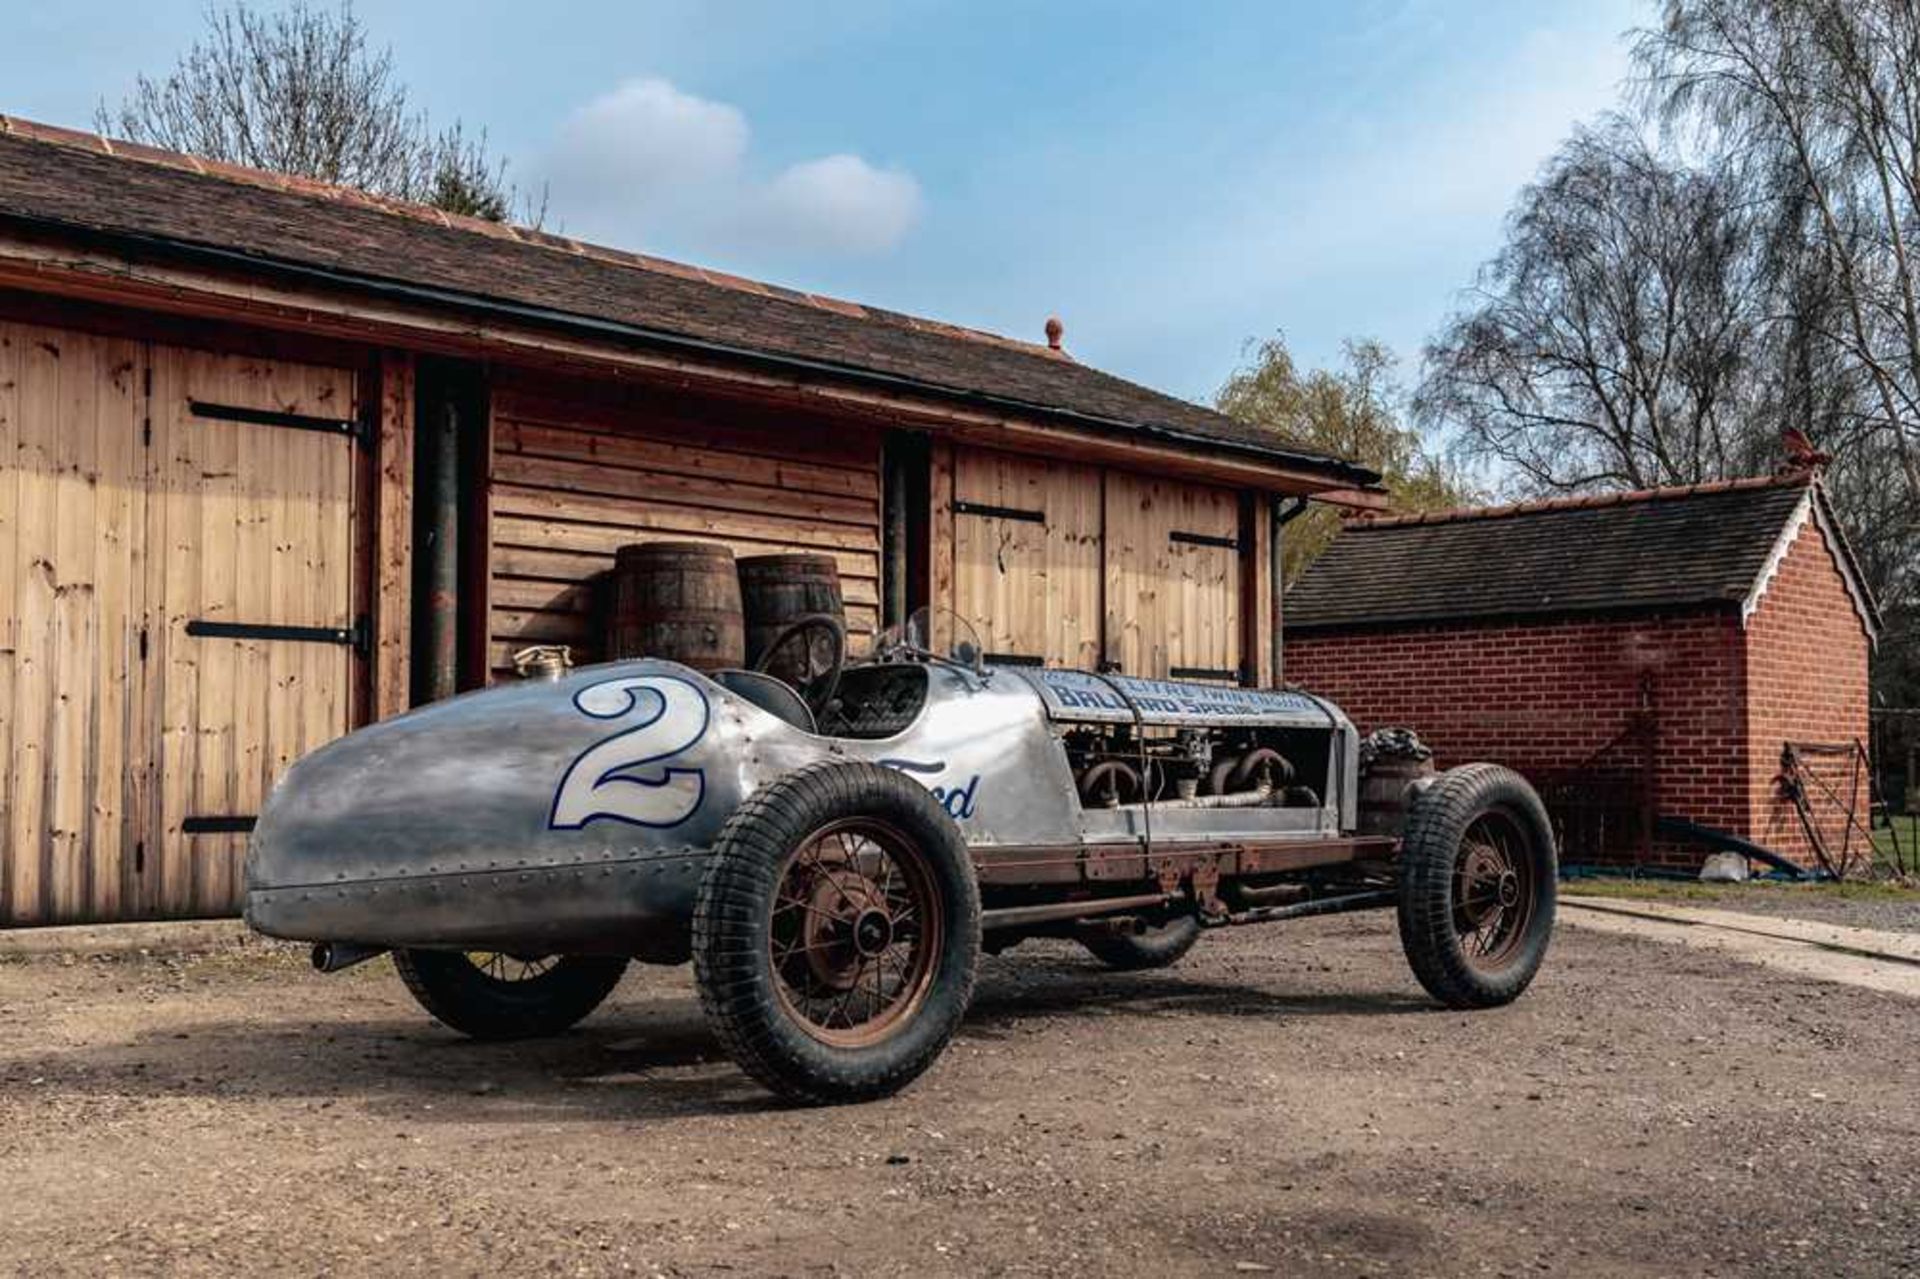 1930 Ford Model A "The Ballard Special" Speedster One off, bespoke built twin-engined pre-war racing - Image 5 of 94